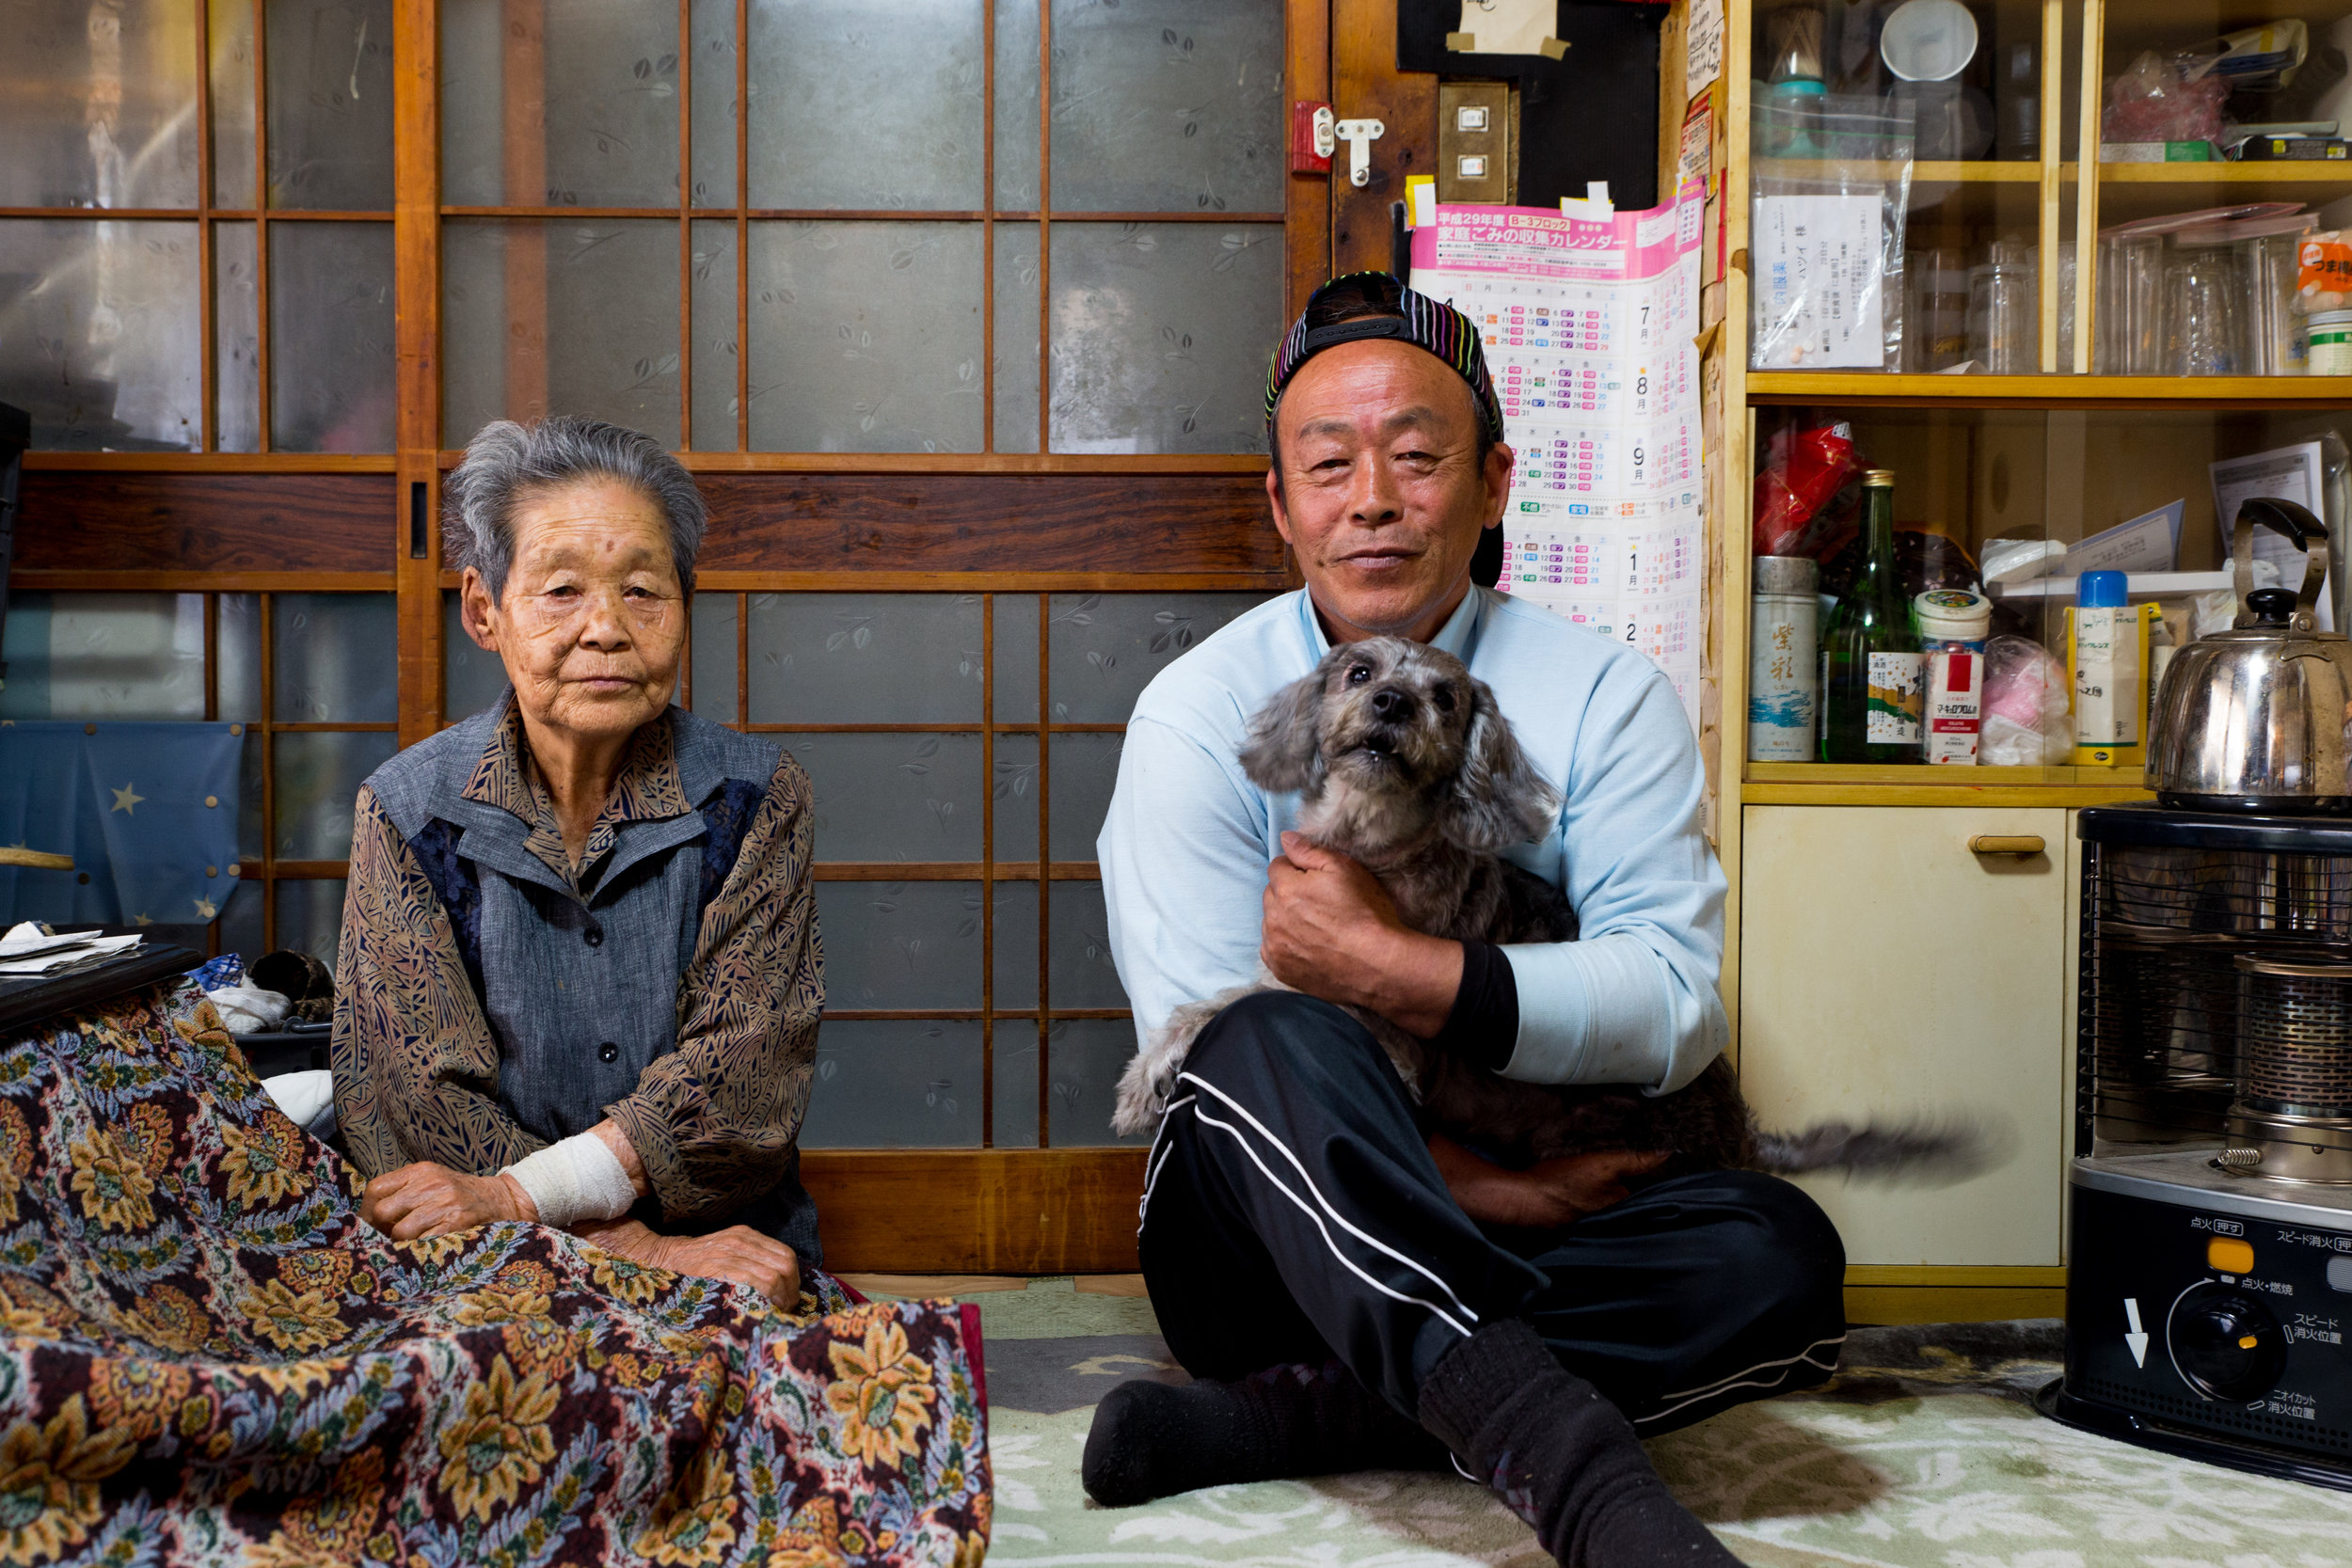  Fisherman Tomo Komatsu and his mother, Hatsui Komatsu, sit in their living room with their dog Marine. Hatsui has lived in her house in Nakoso for more than 60 years. She has other children but they have moved away. Tomo Komatsu has stayed to take c